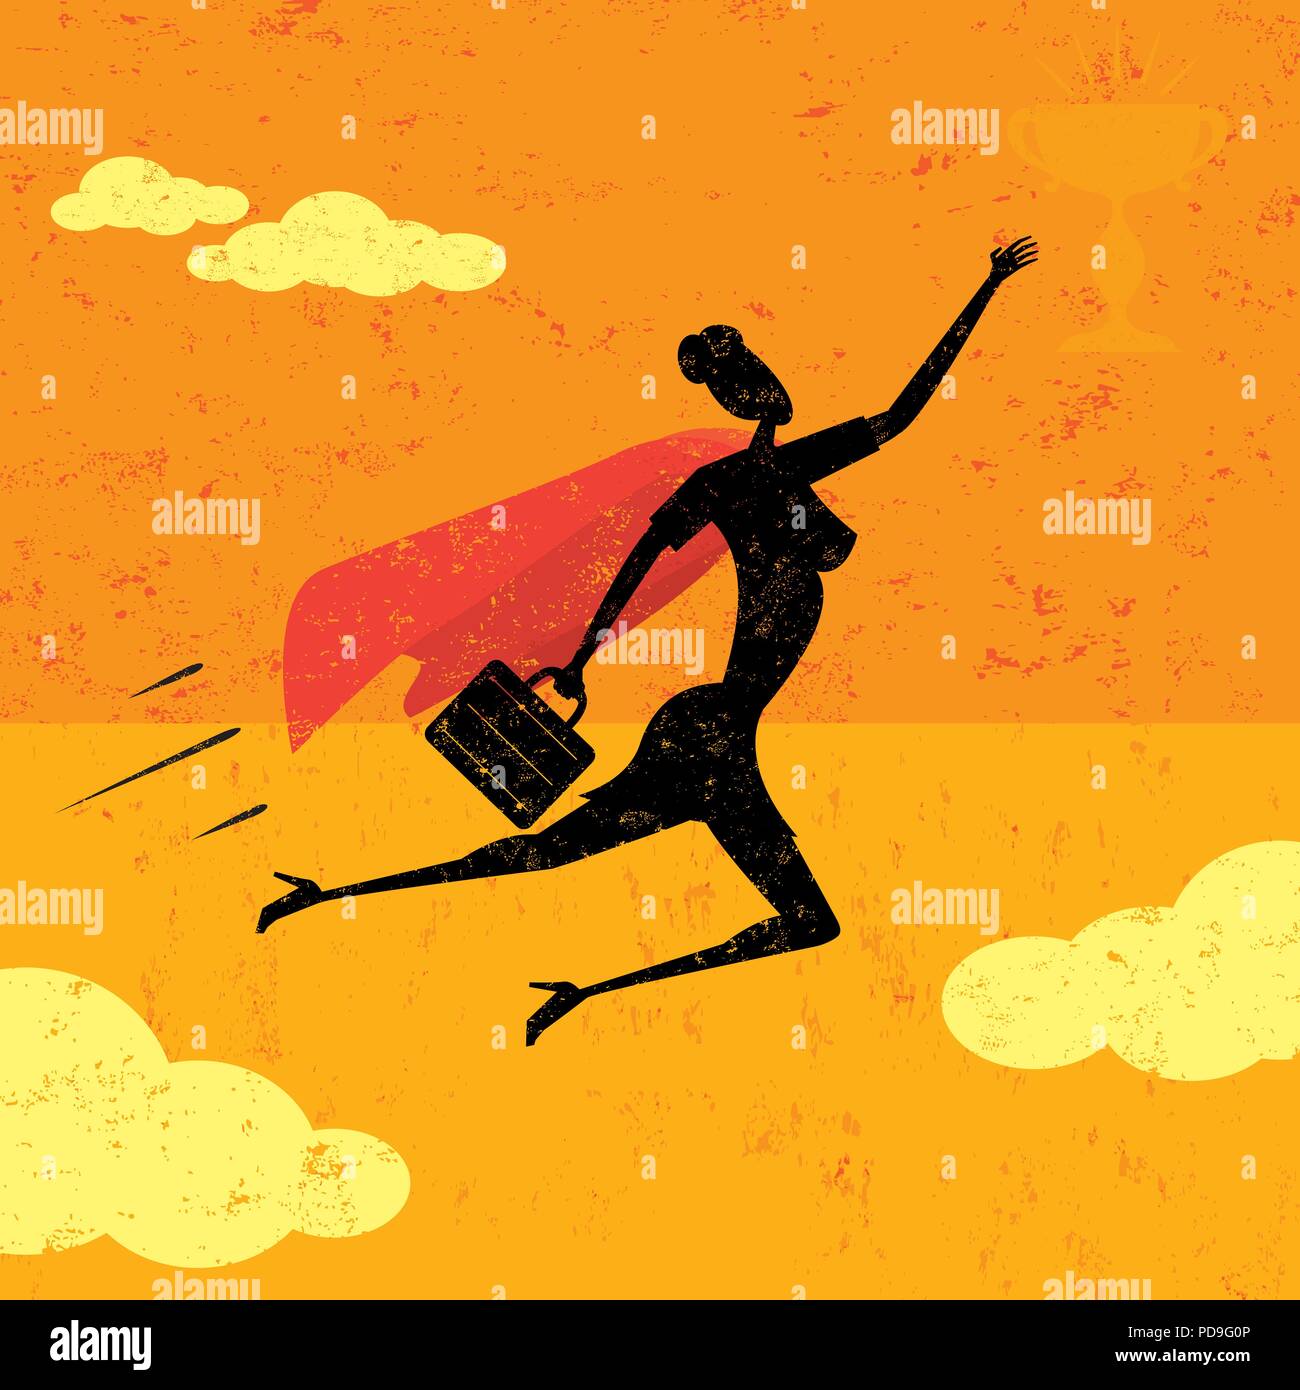 Super Businessman. A super businesswoman flying high to achieve her goal. Stock Vector